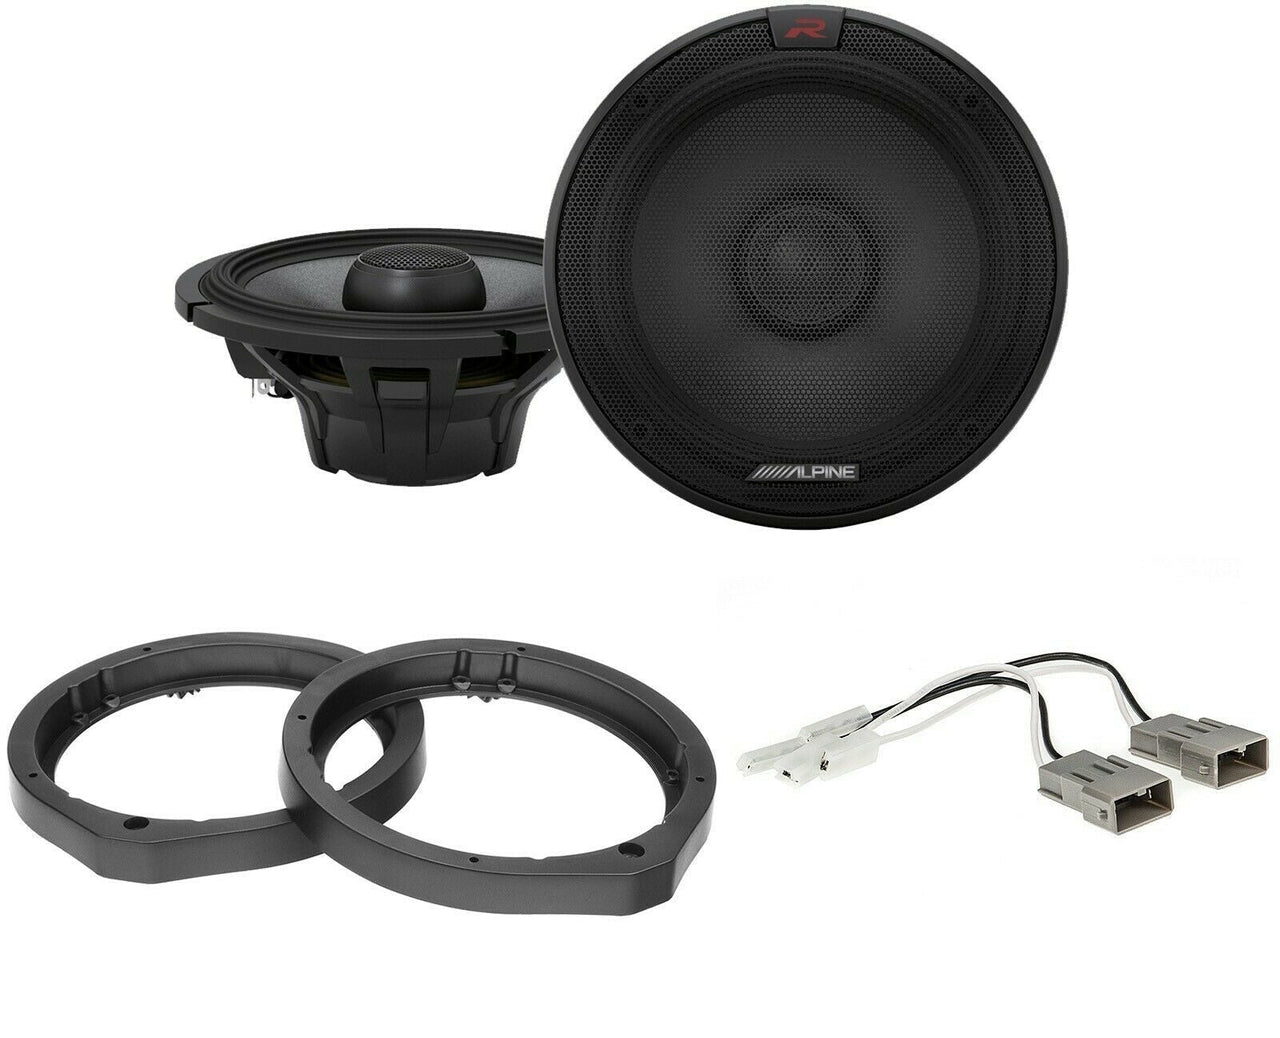 Alpine R-S65.2 + Front or Rear Speaker Adapters + Harness For Select Honda and Acura Vehicles